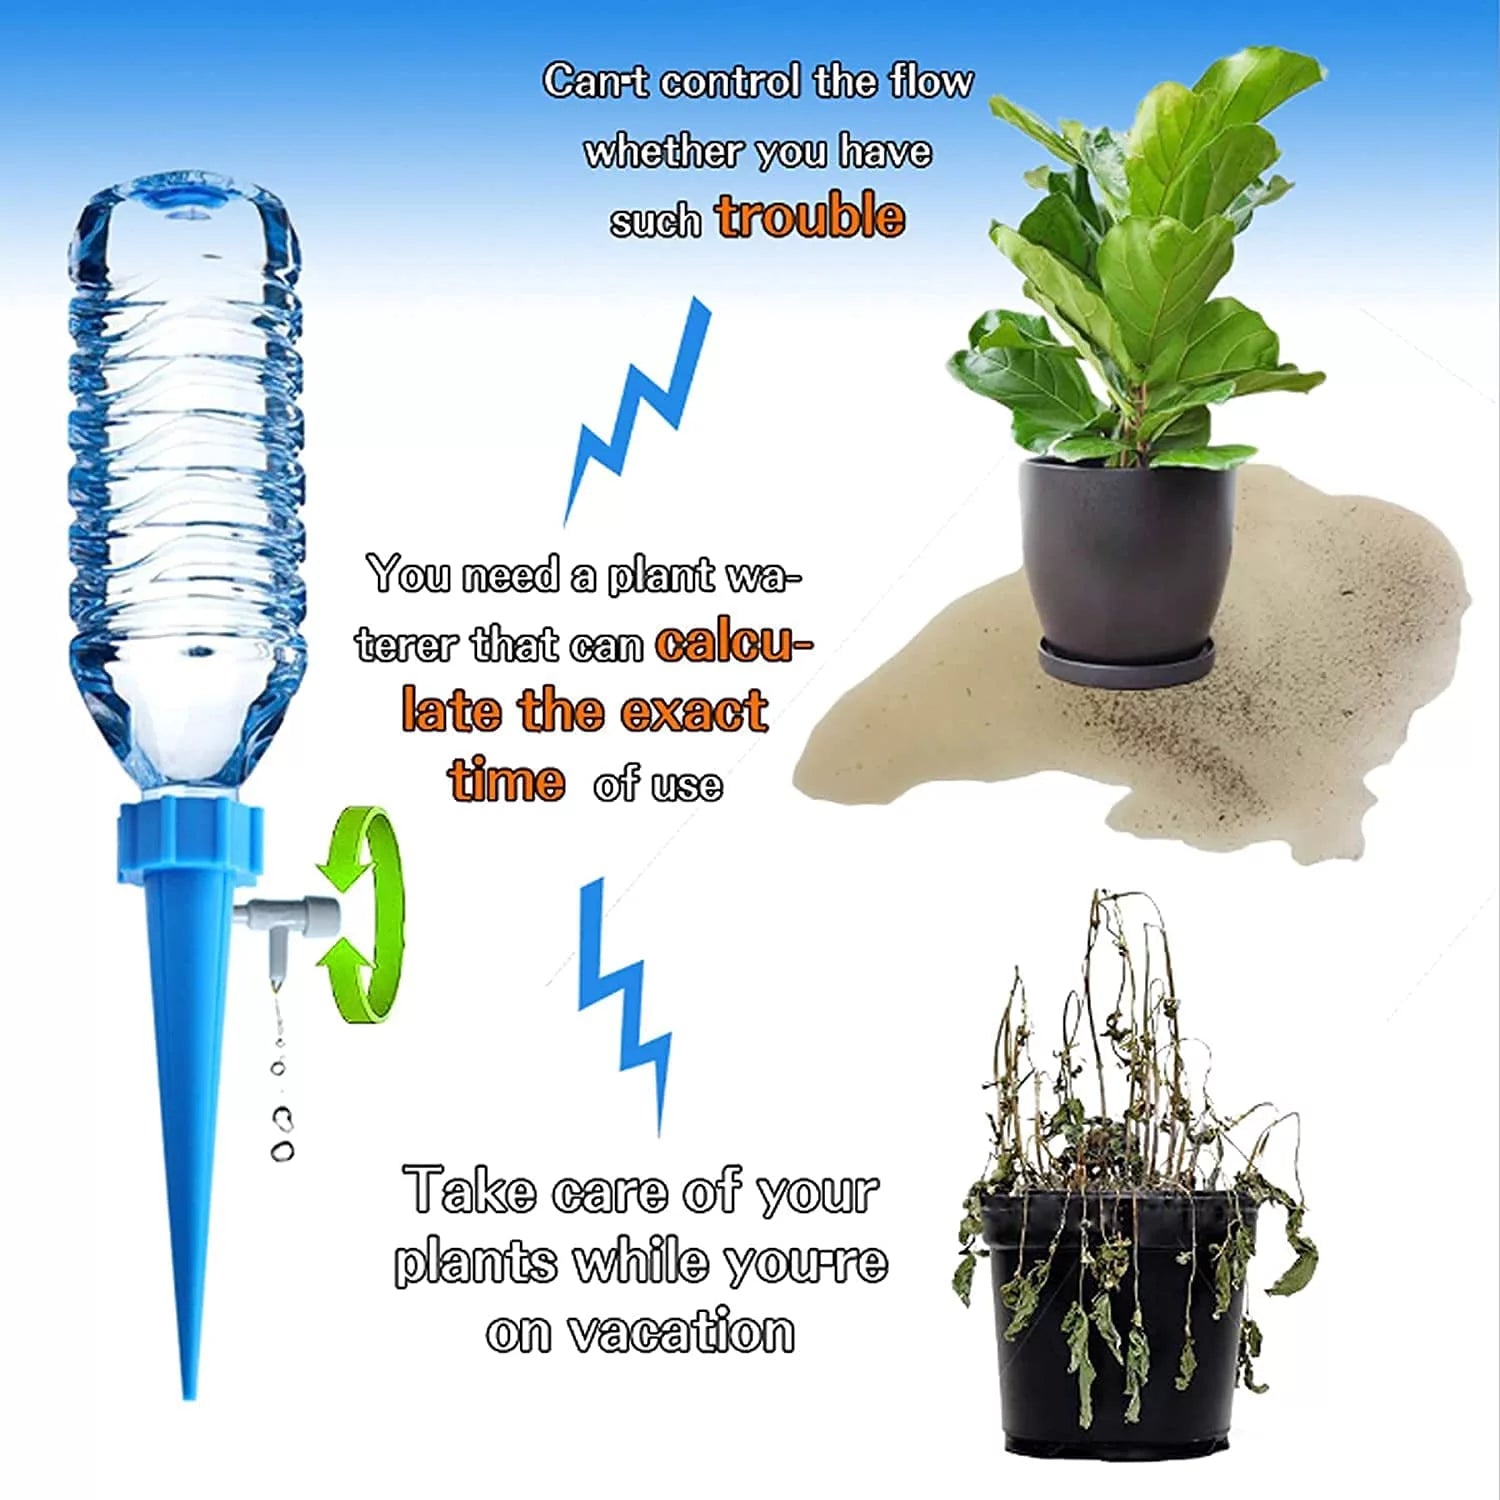 Automatic Self Watering System Plant Water Drip Irrigation Garden Tool, Pack of 10 Pcs